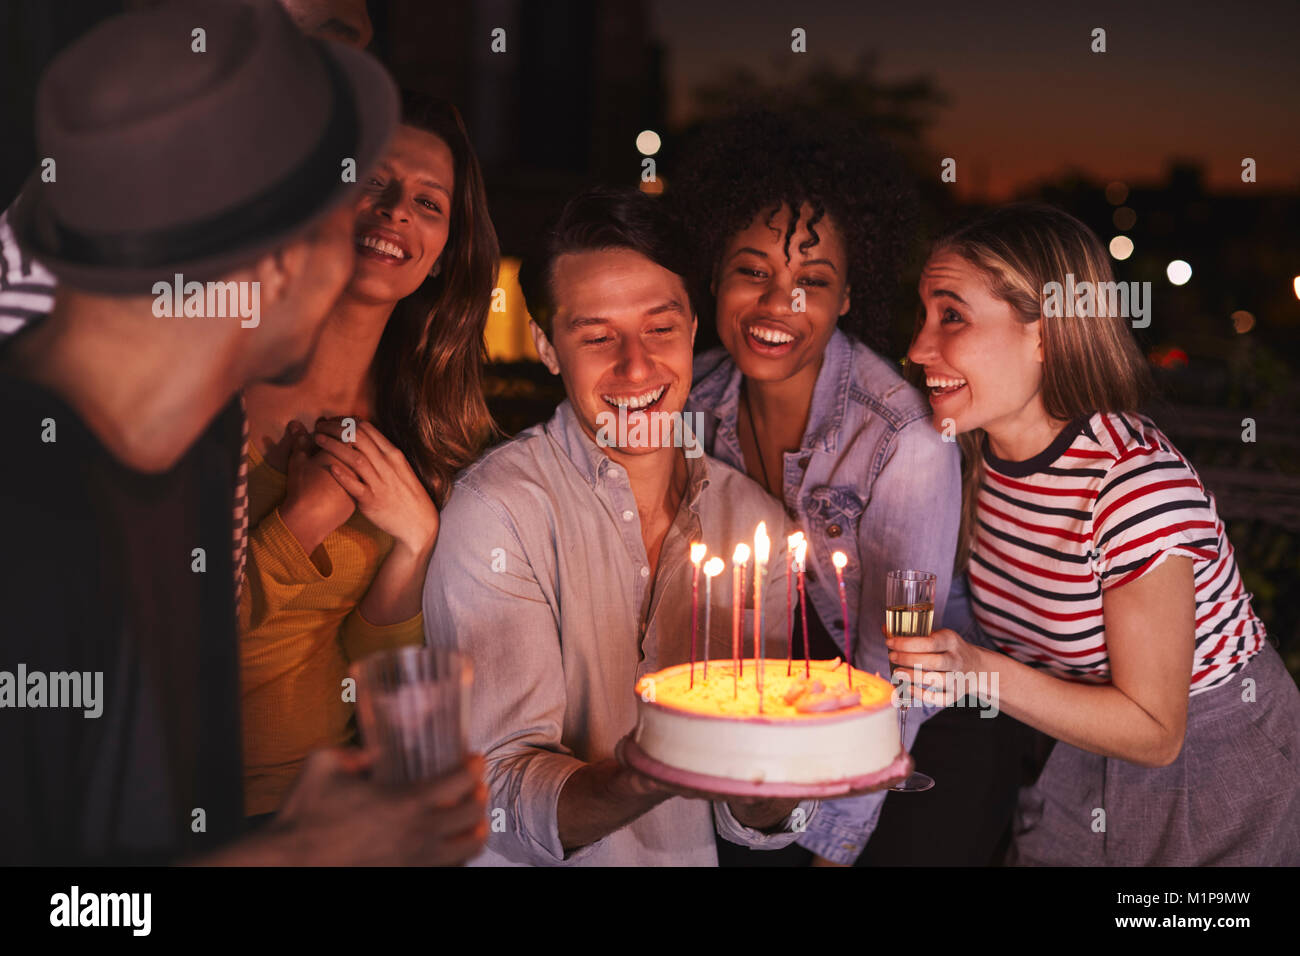 Young adults celebrating with a birthday cake on a rooftop Stock Photo